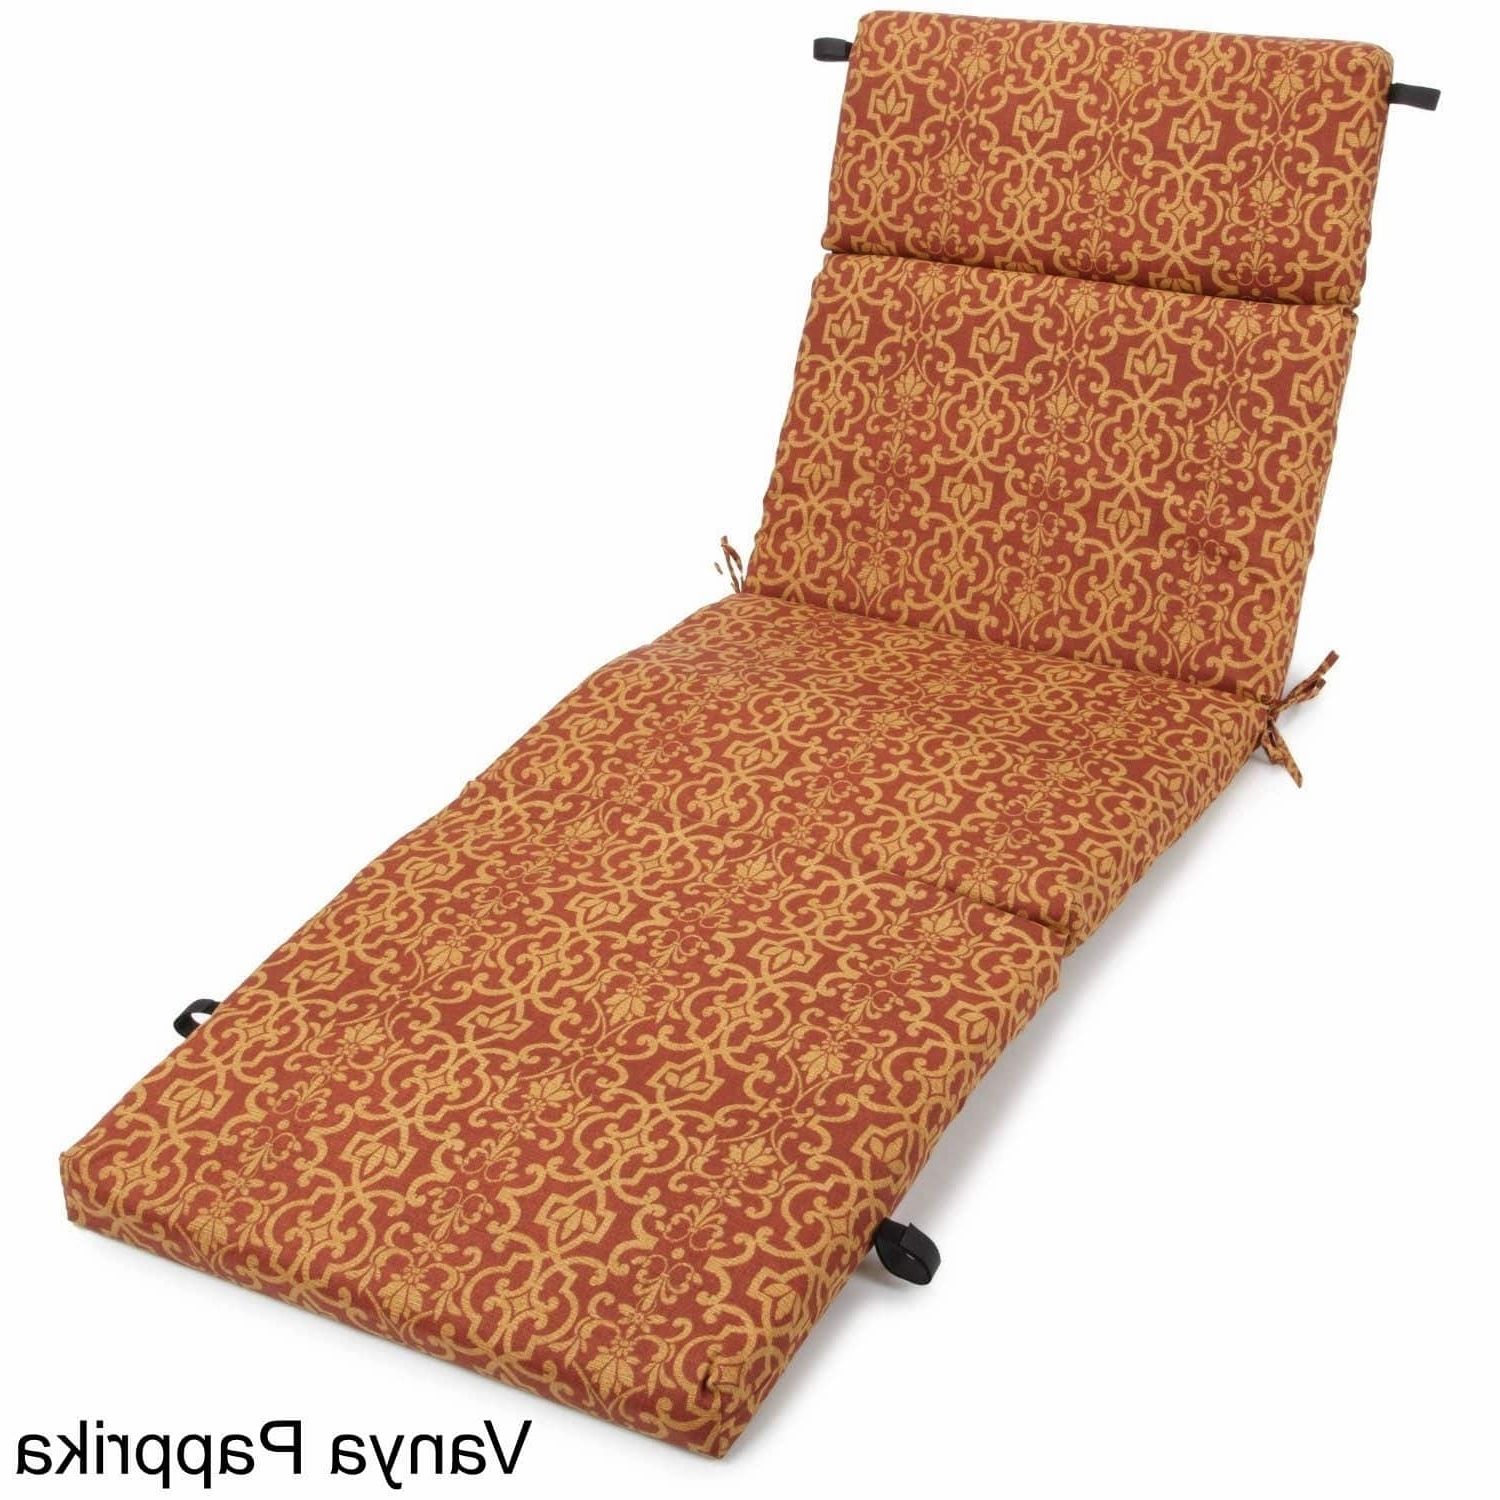 Chaise Lounge Outdoor Cushions In Best And Newest Outdoor Chaise Lounge Cushion – Free Shipping Today – Overstock (View 13 of 15)